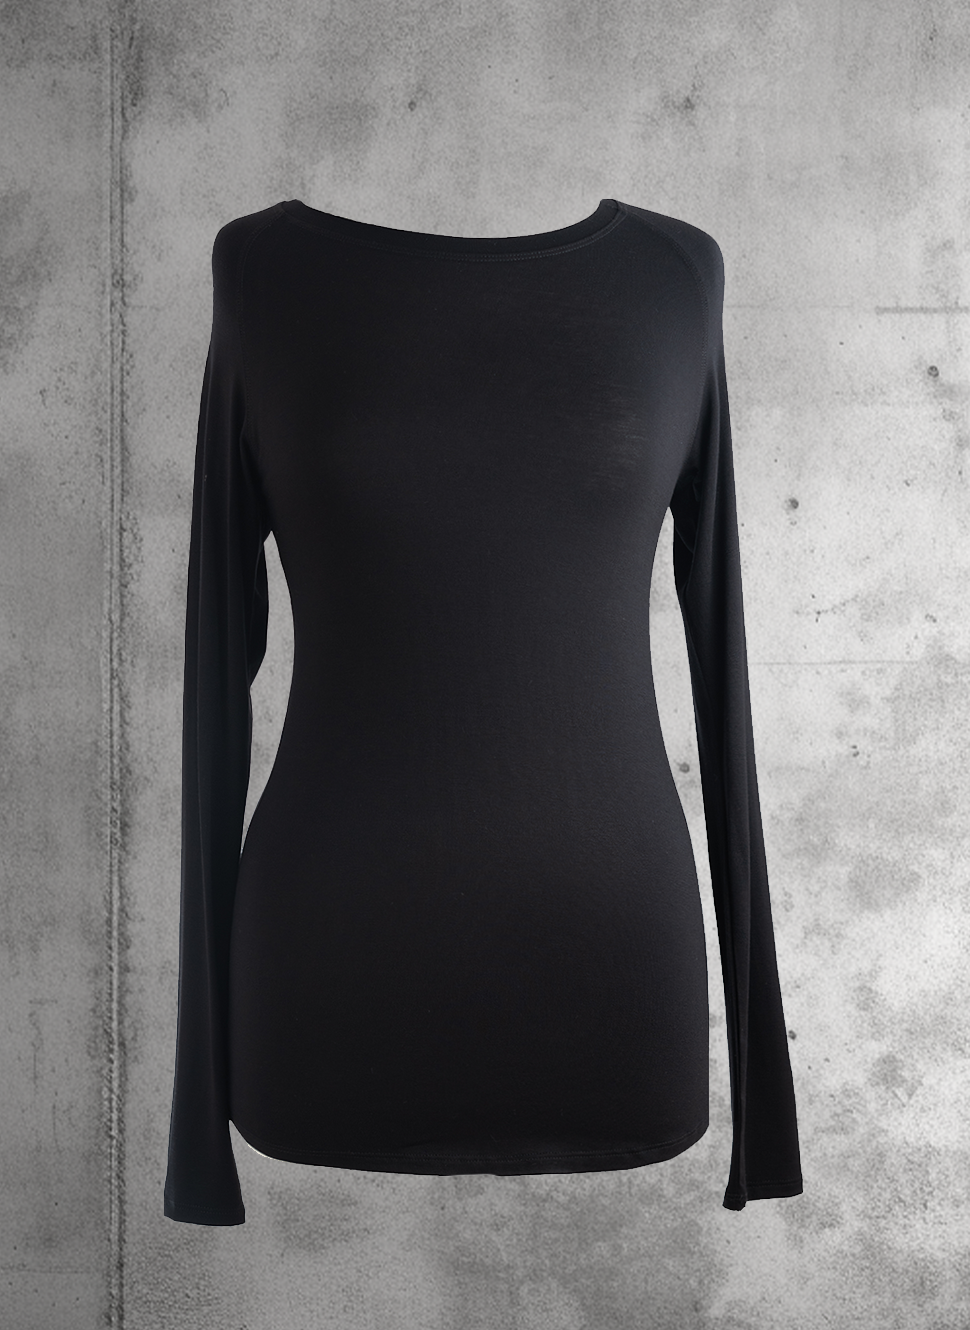 Vancouver made loungewear top in black 